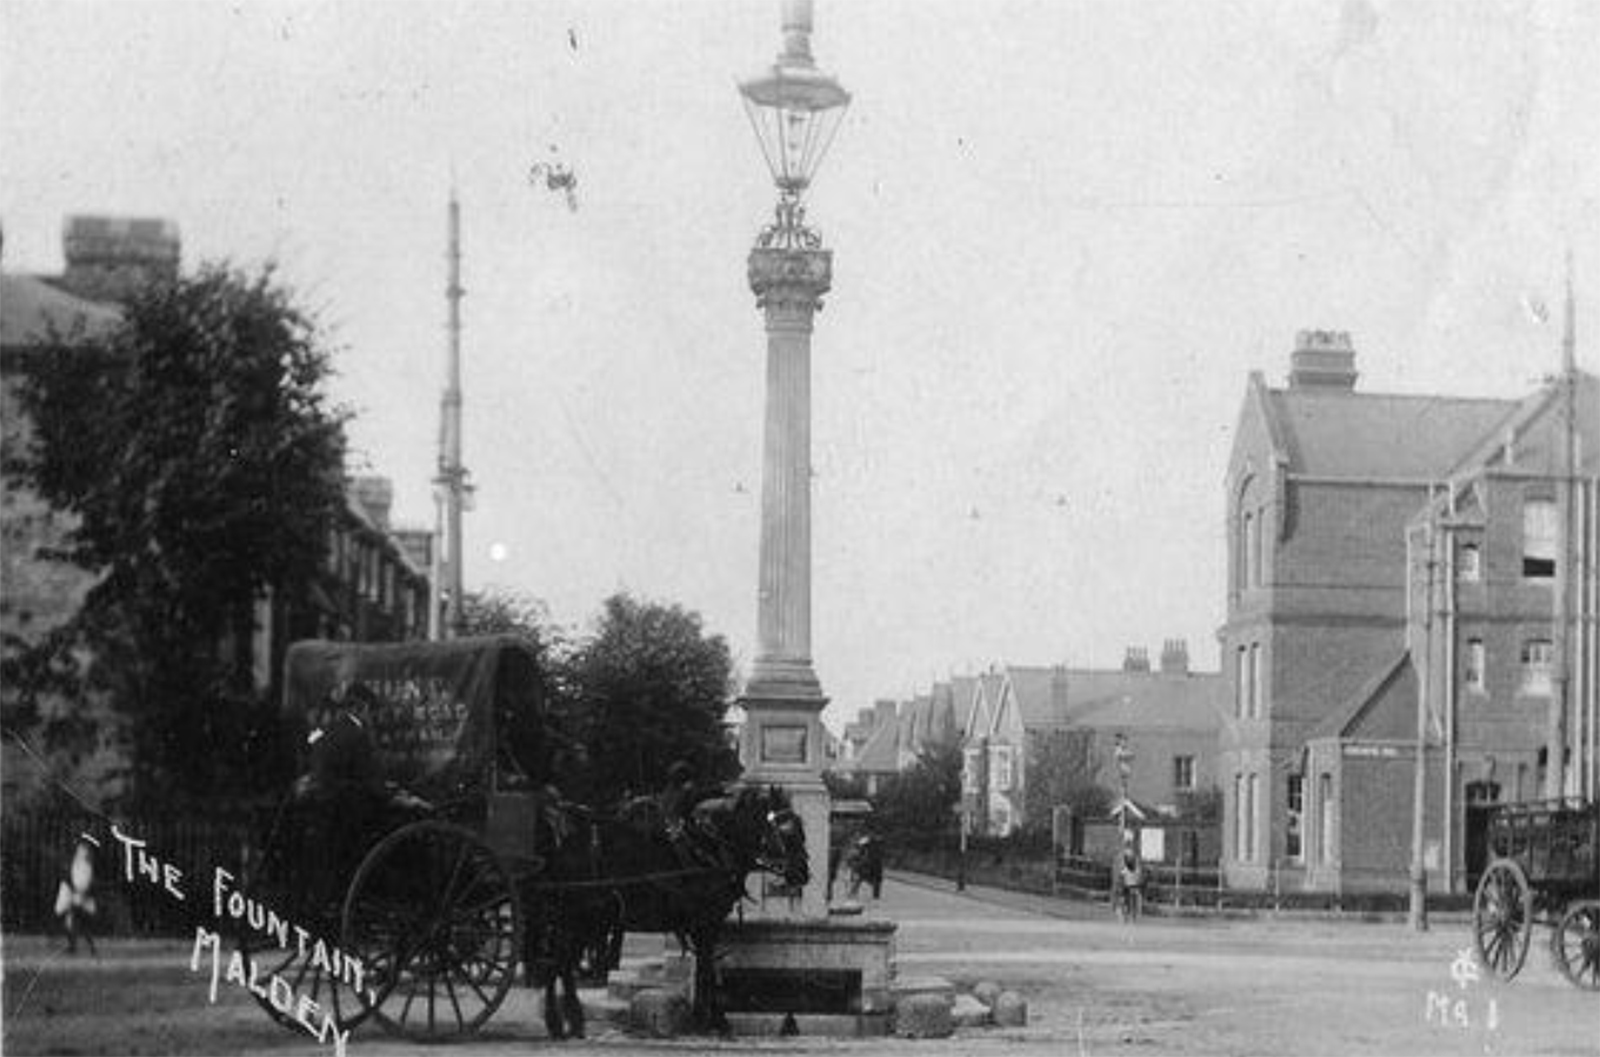 Gateway to New Malden: historic photograph of fountain